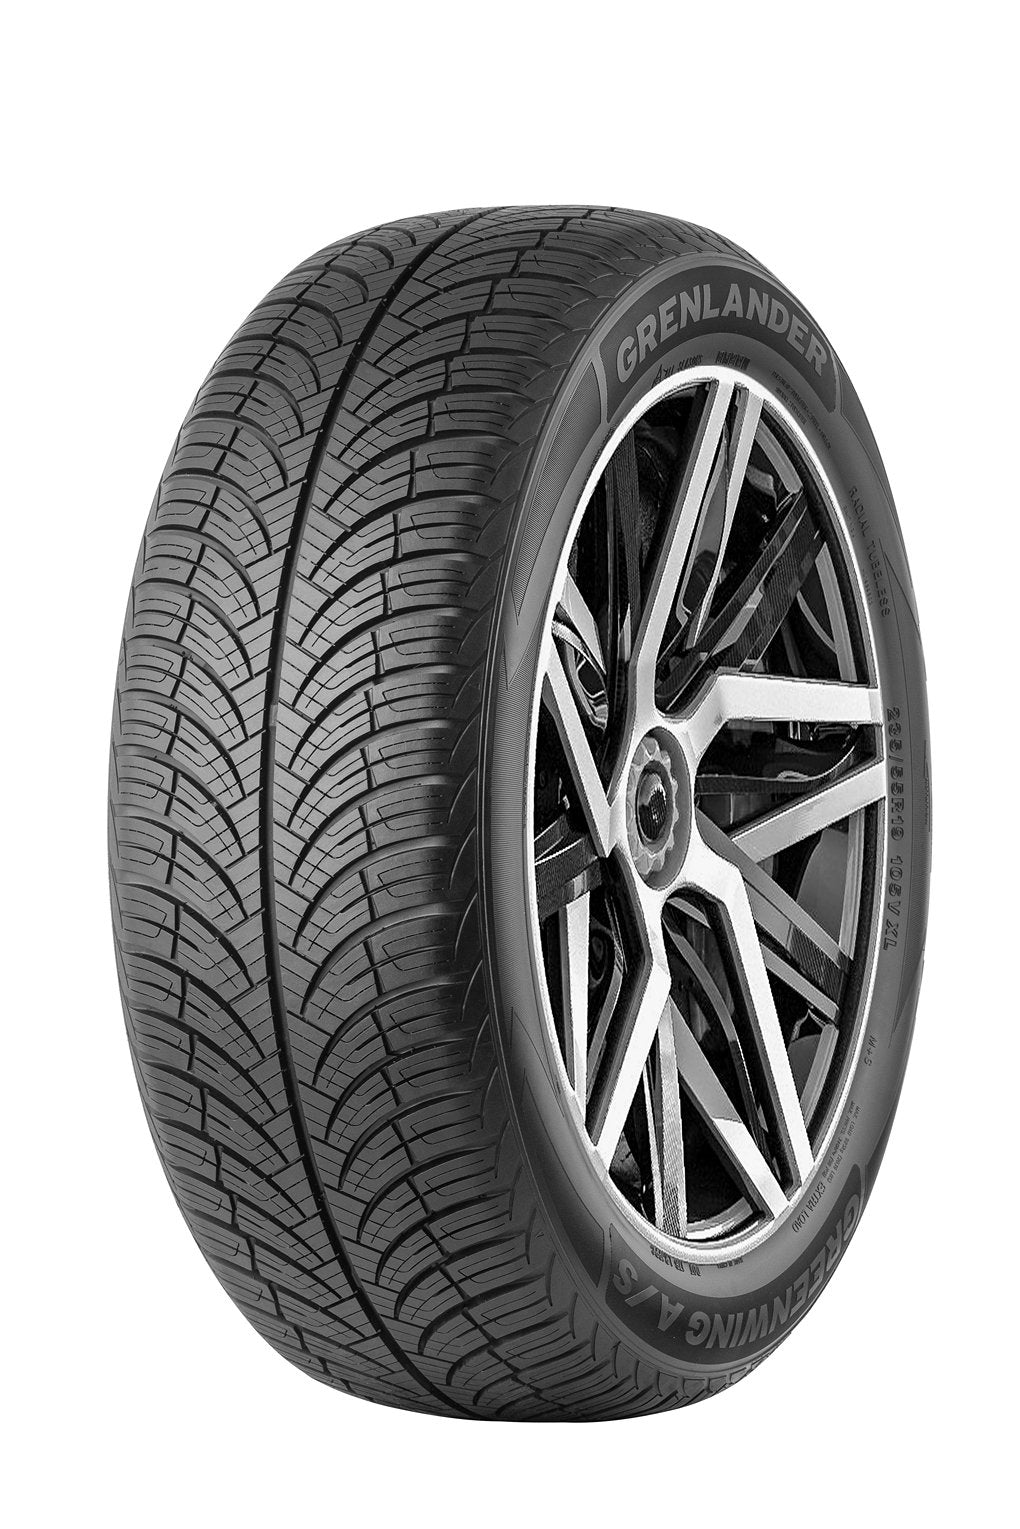 205/60R16 GRENLANDER GREENWING A/S ALL WEATHER - Toee Tire